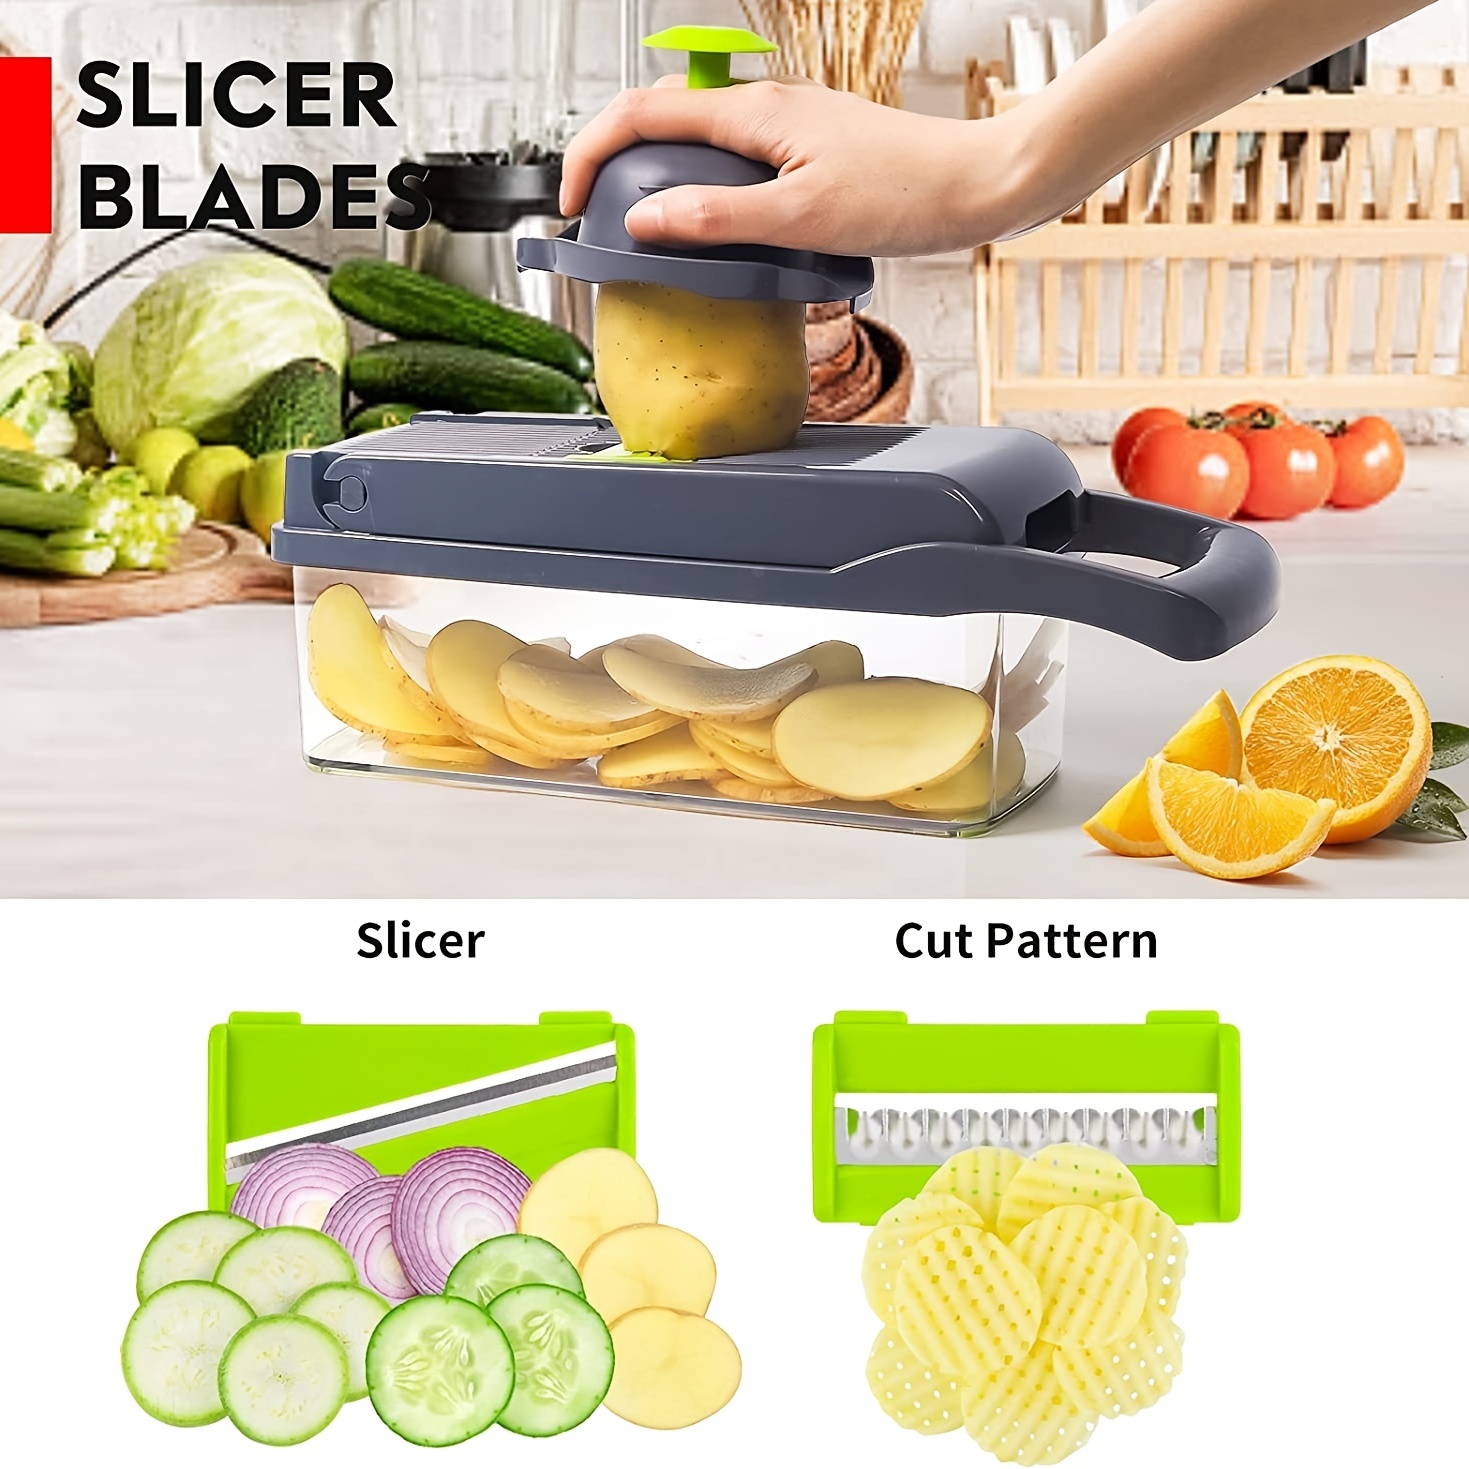  15 in 1 Vegetable Chopper, Multifunctional Vegetable Slicer  Dicer Chopper, Fruit and Vegetable Chopper with Container, Onion Chopper  with 8 Blades, Carrot and Garlic Chopper Vegetable Cutter: Home & Kitchen